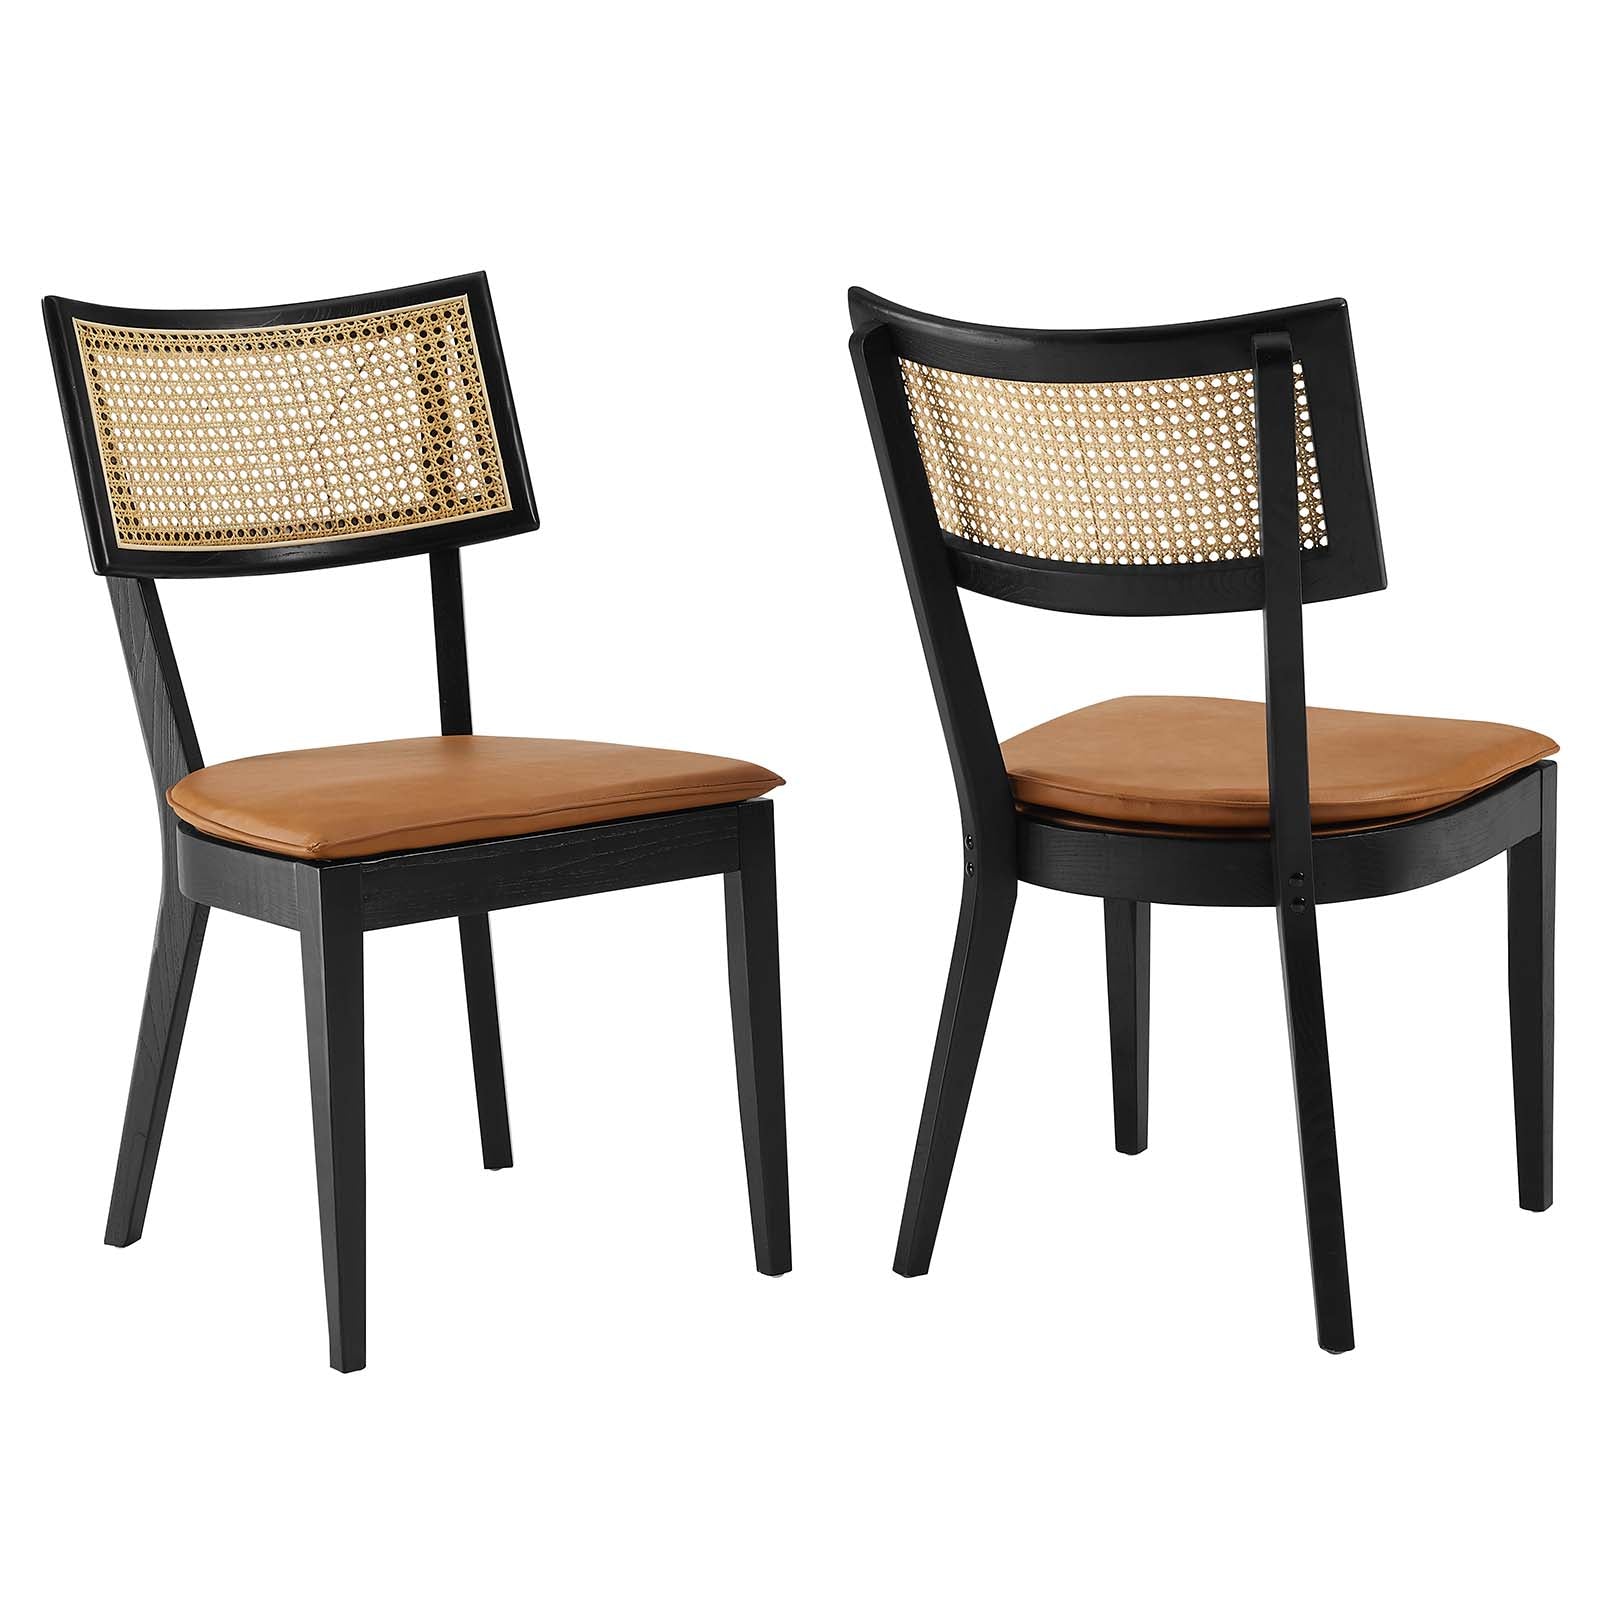 Caledonia Vegan Leather Upholstered Wood Dining Chairs - Set of 2 - East Shore Modern Home Furnishings